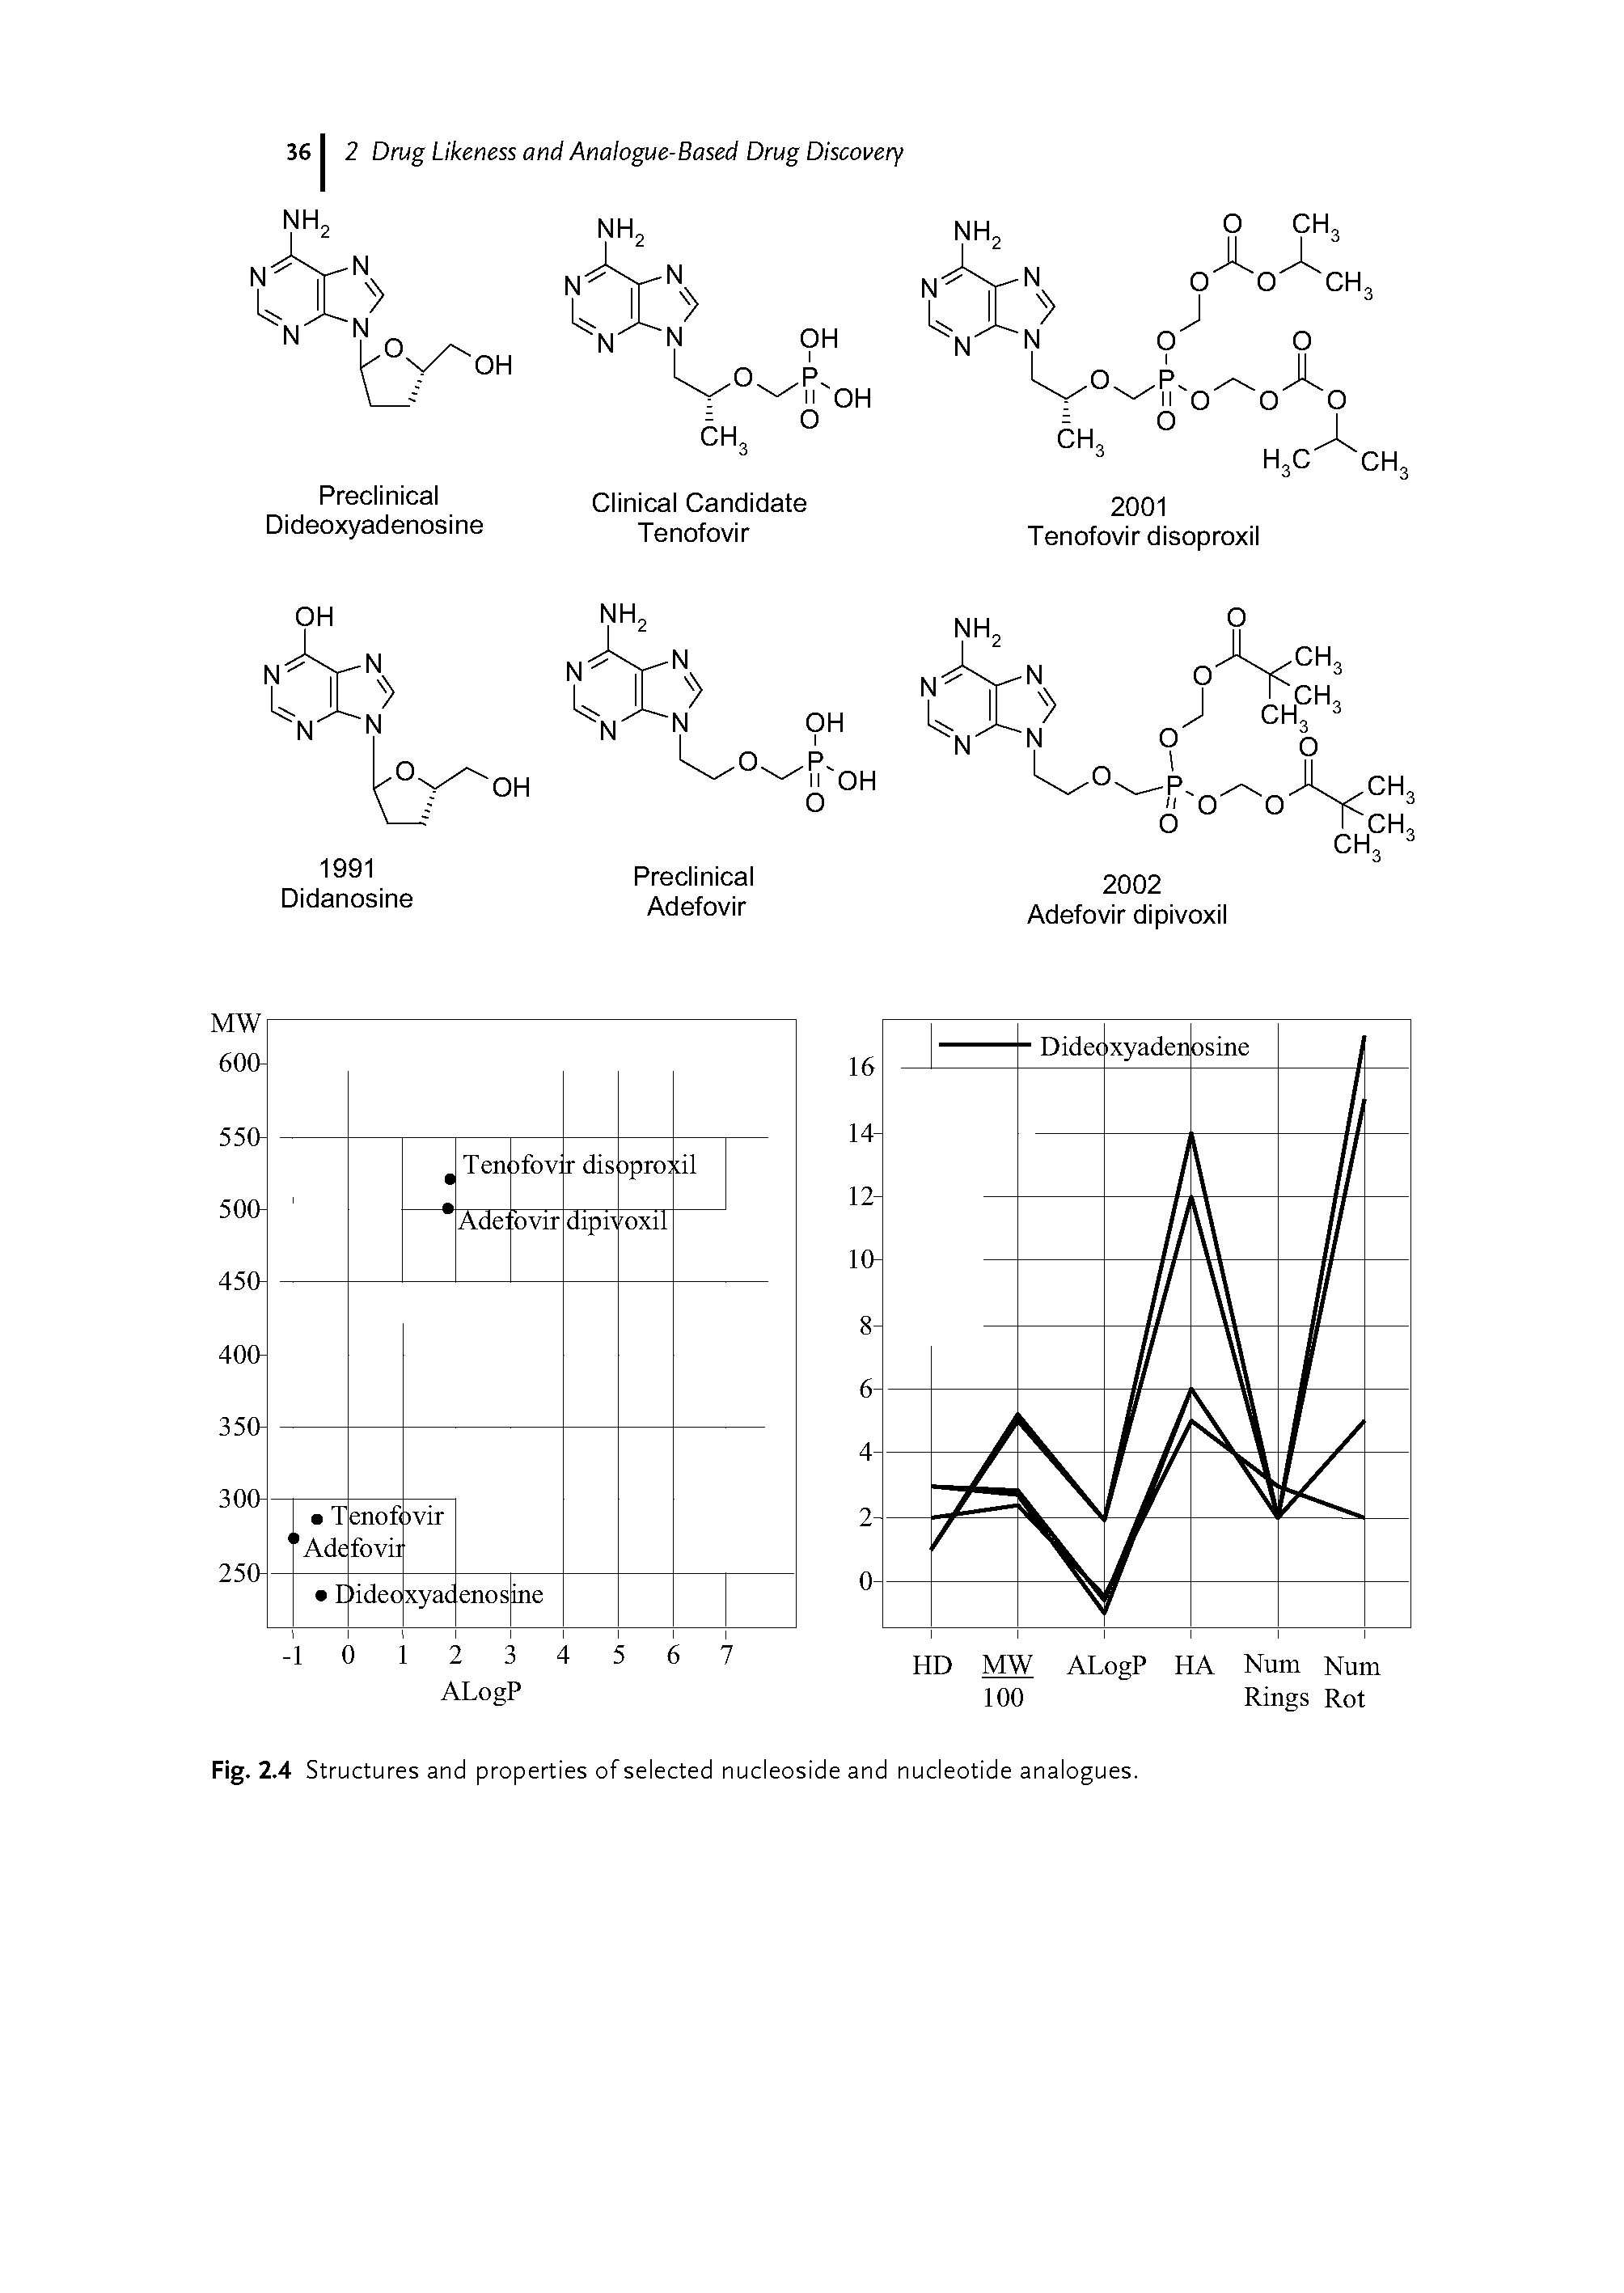 Fig. 2.4 Structures and properties of selected nucleoside and nucleotide analogues.